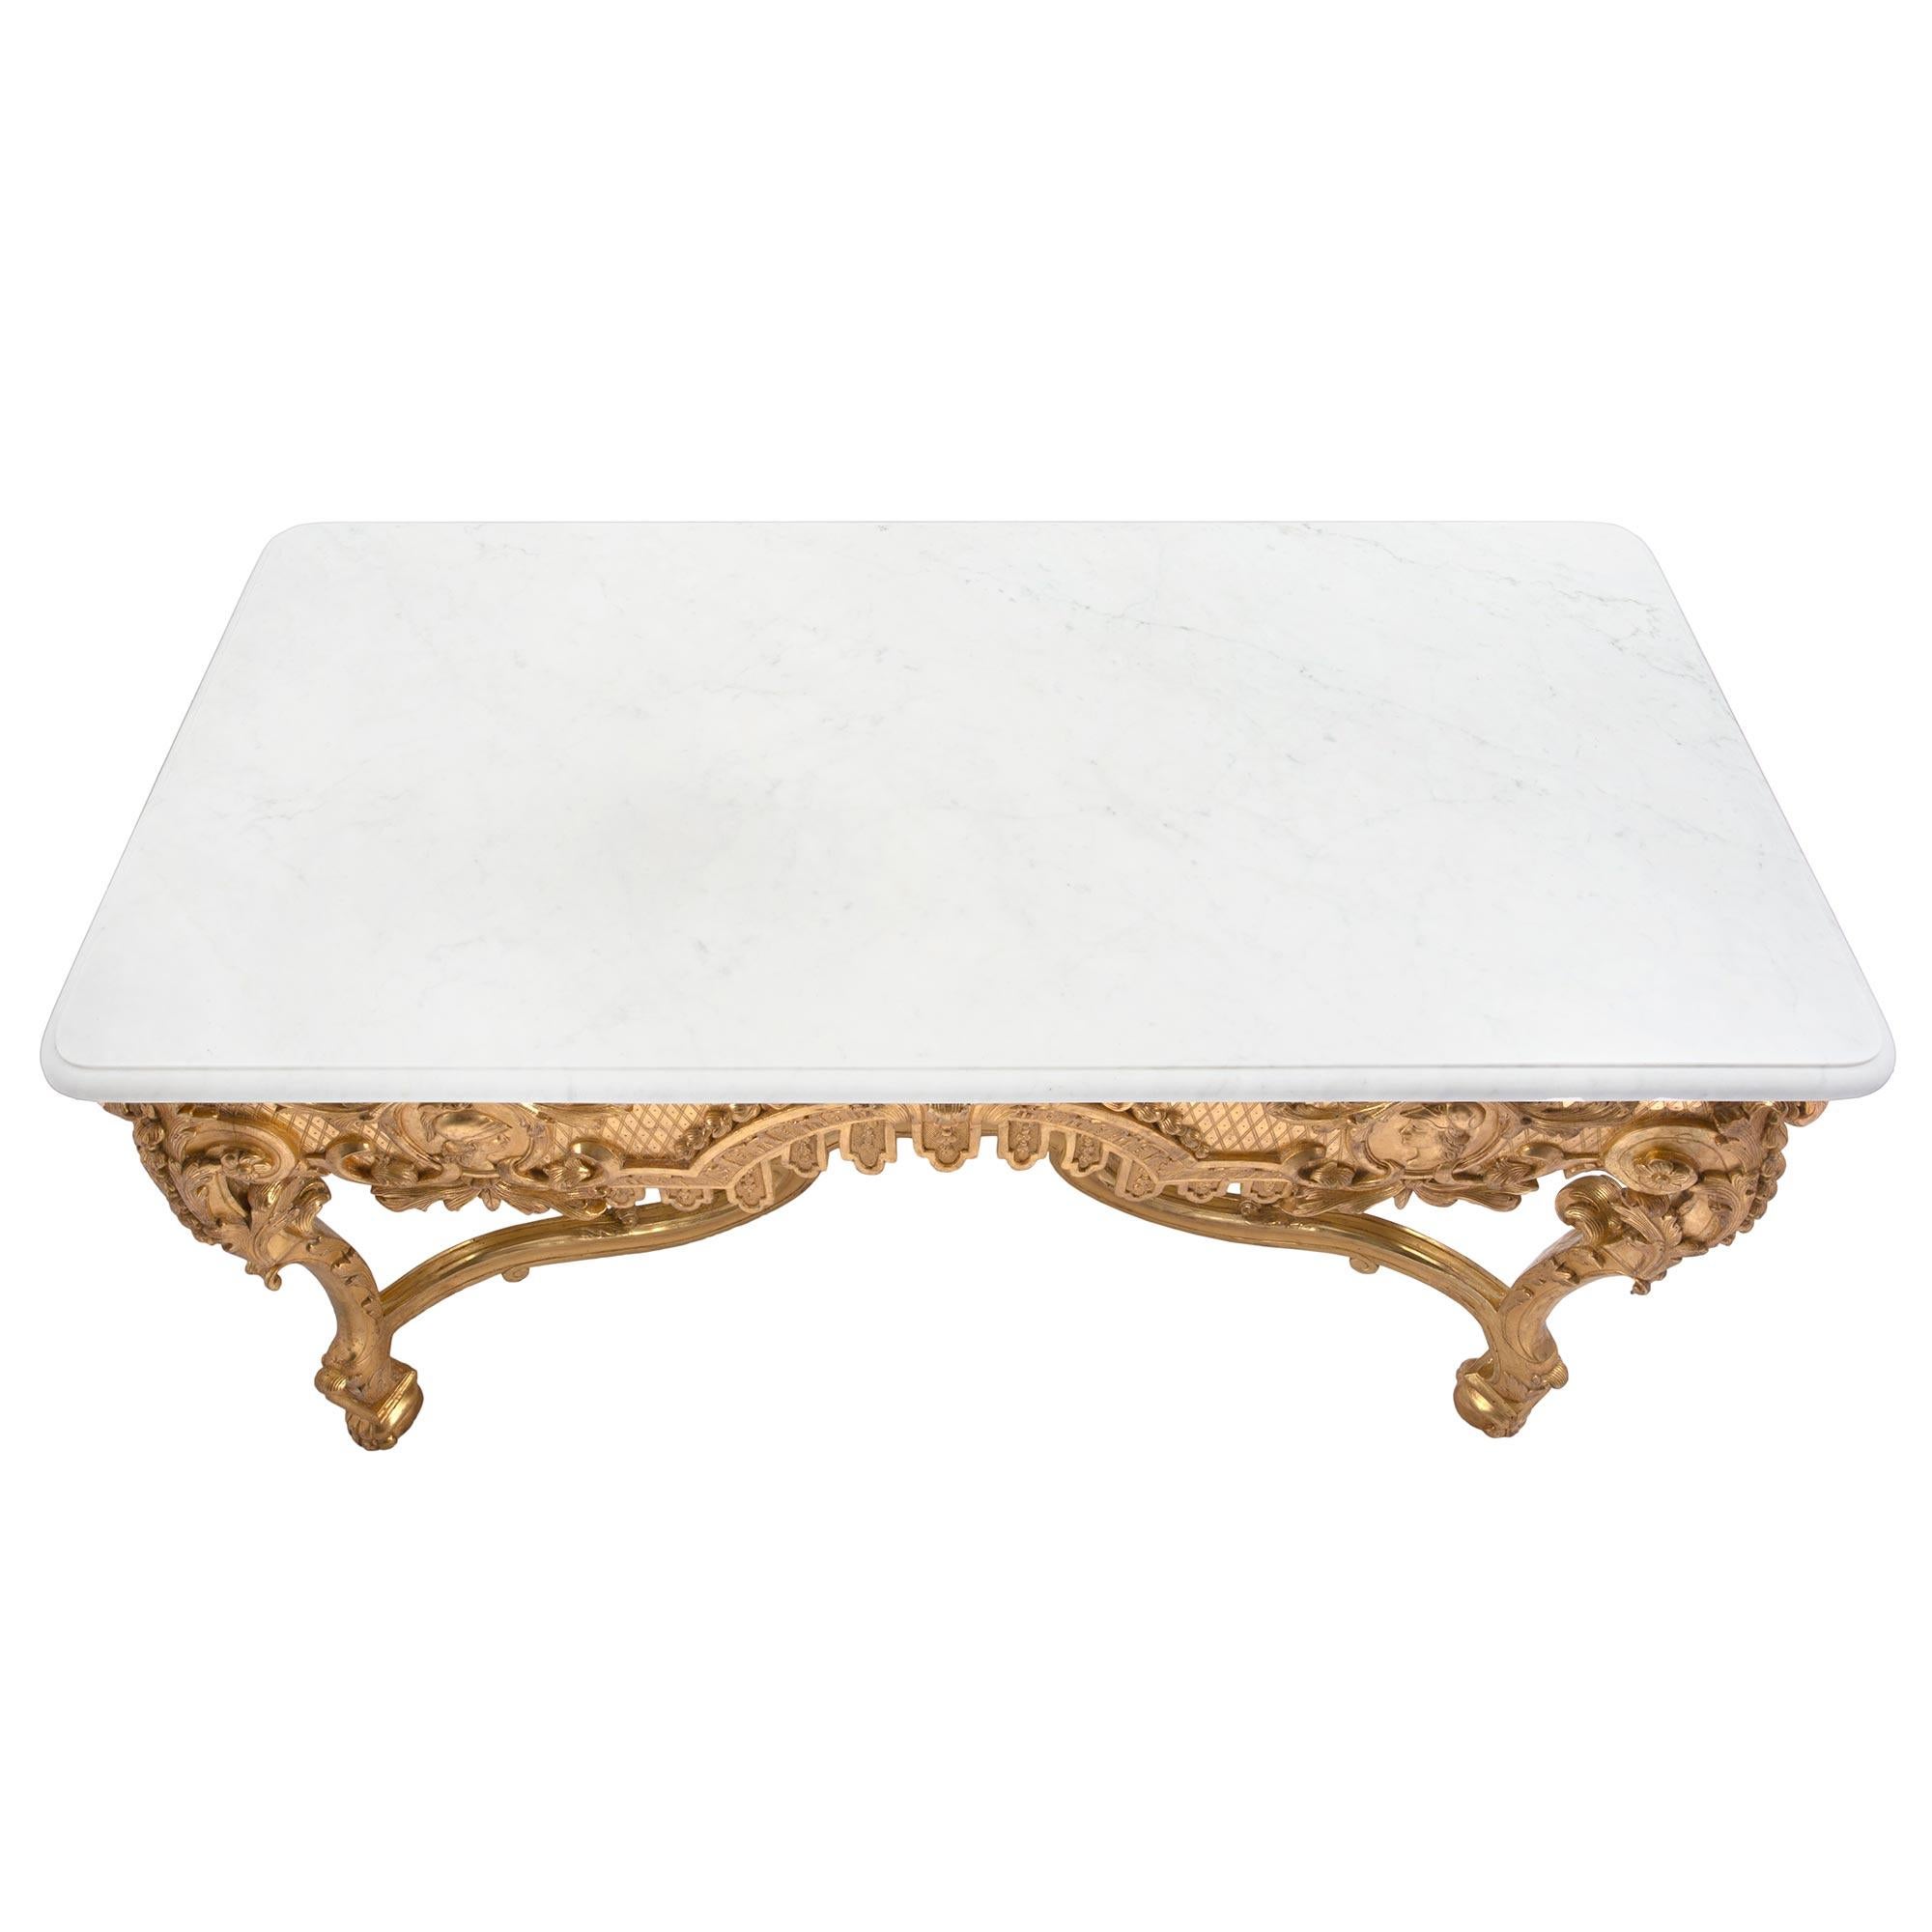 A stunning French 19th century Régence st. giltwood and white Carrara marble rectangular center table. The table is raised by handsome paw feet below impressive cabriole legs decorated with richly carved foliate designs. Each leg is connected by a